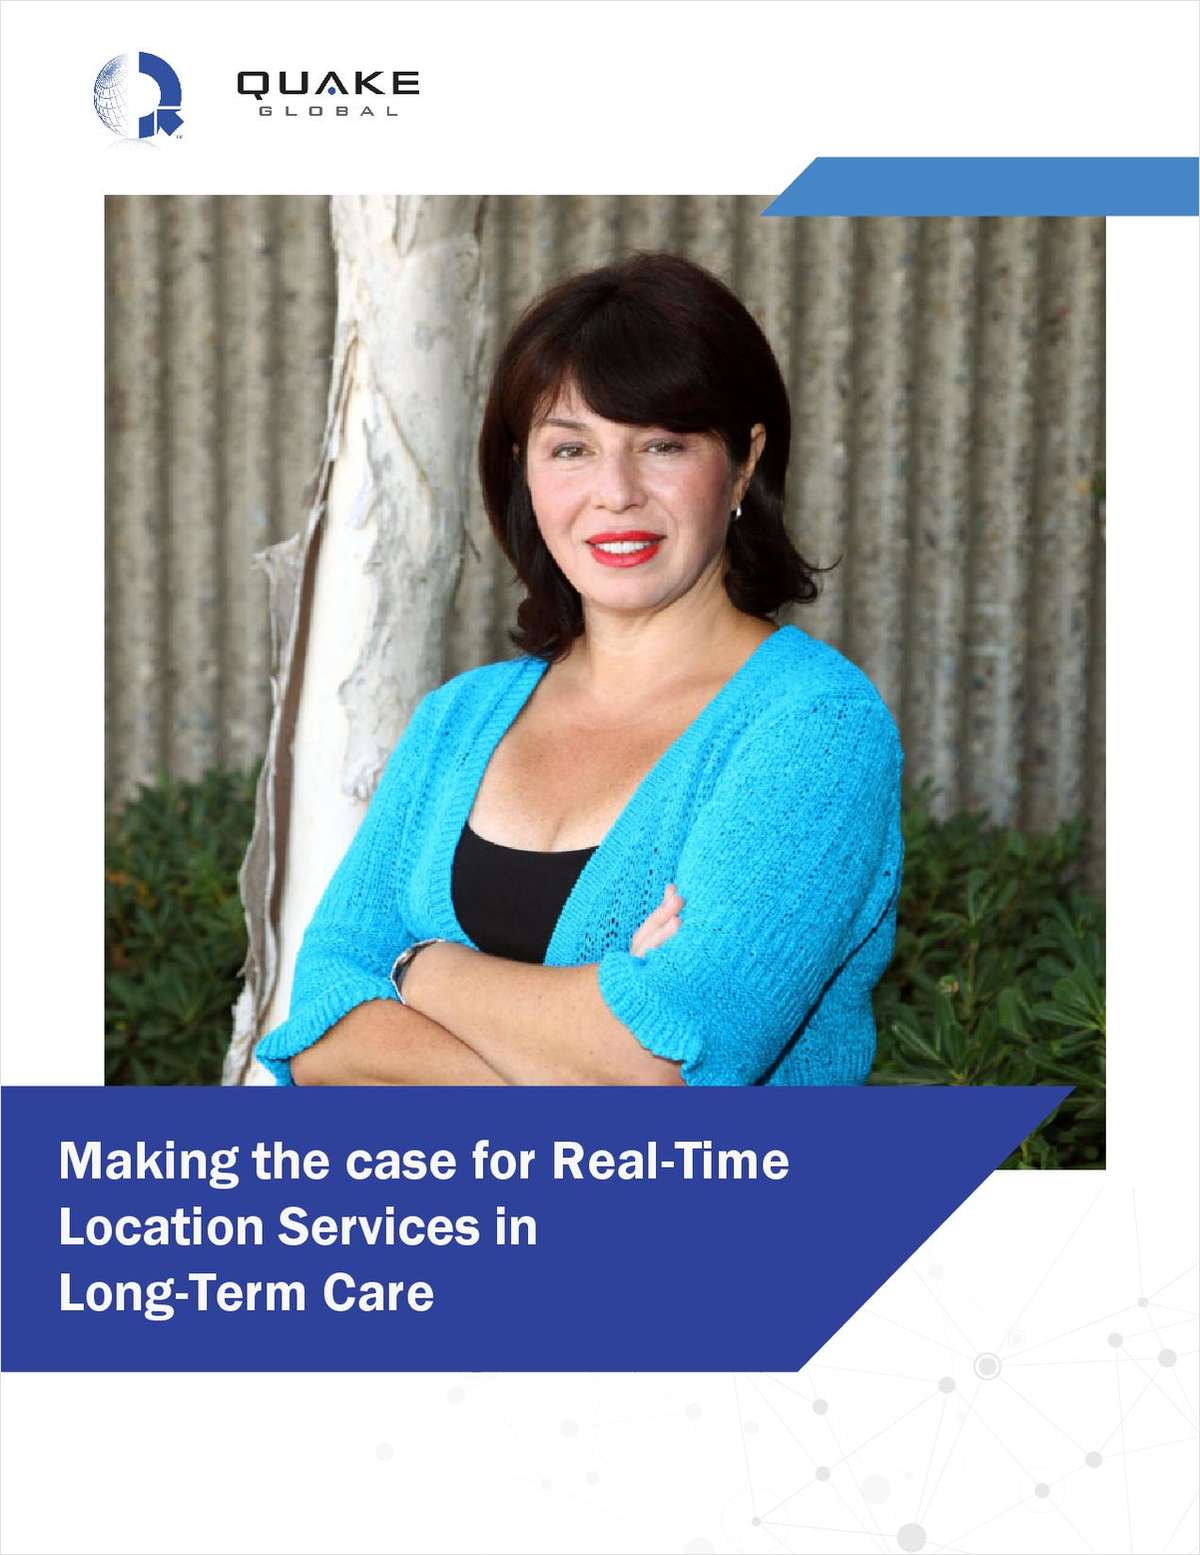 Making the case for real-time location services in long-term care